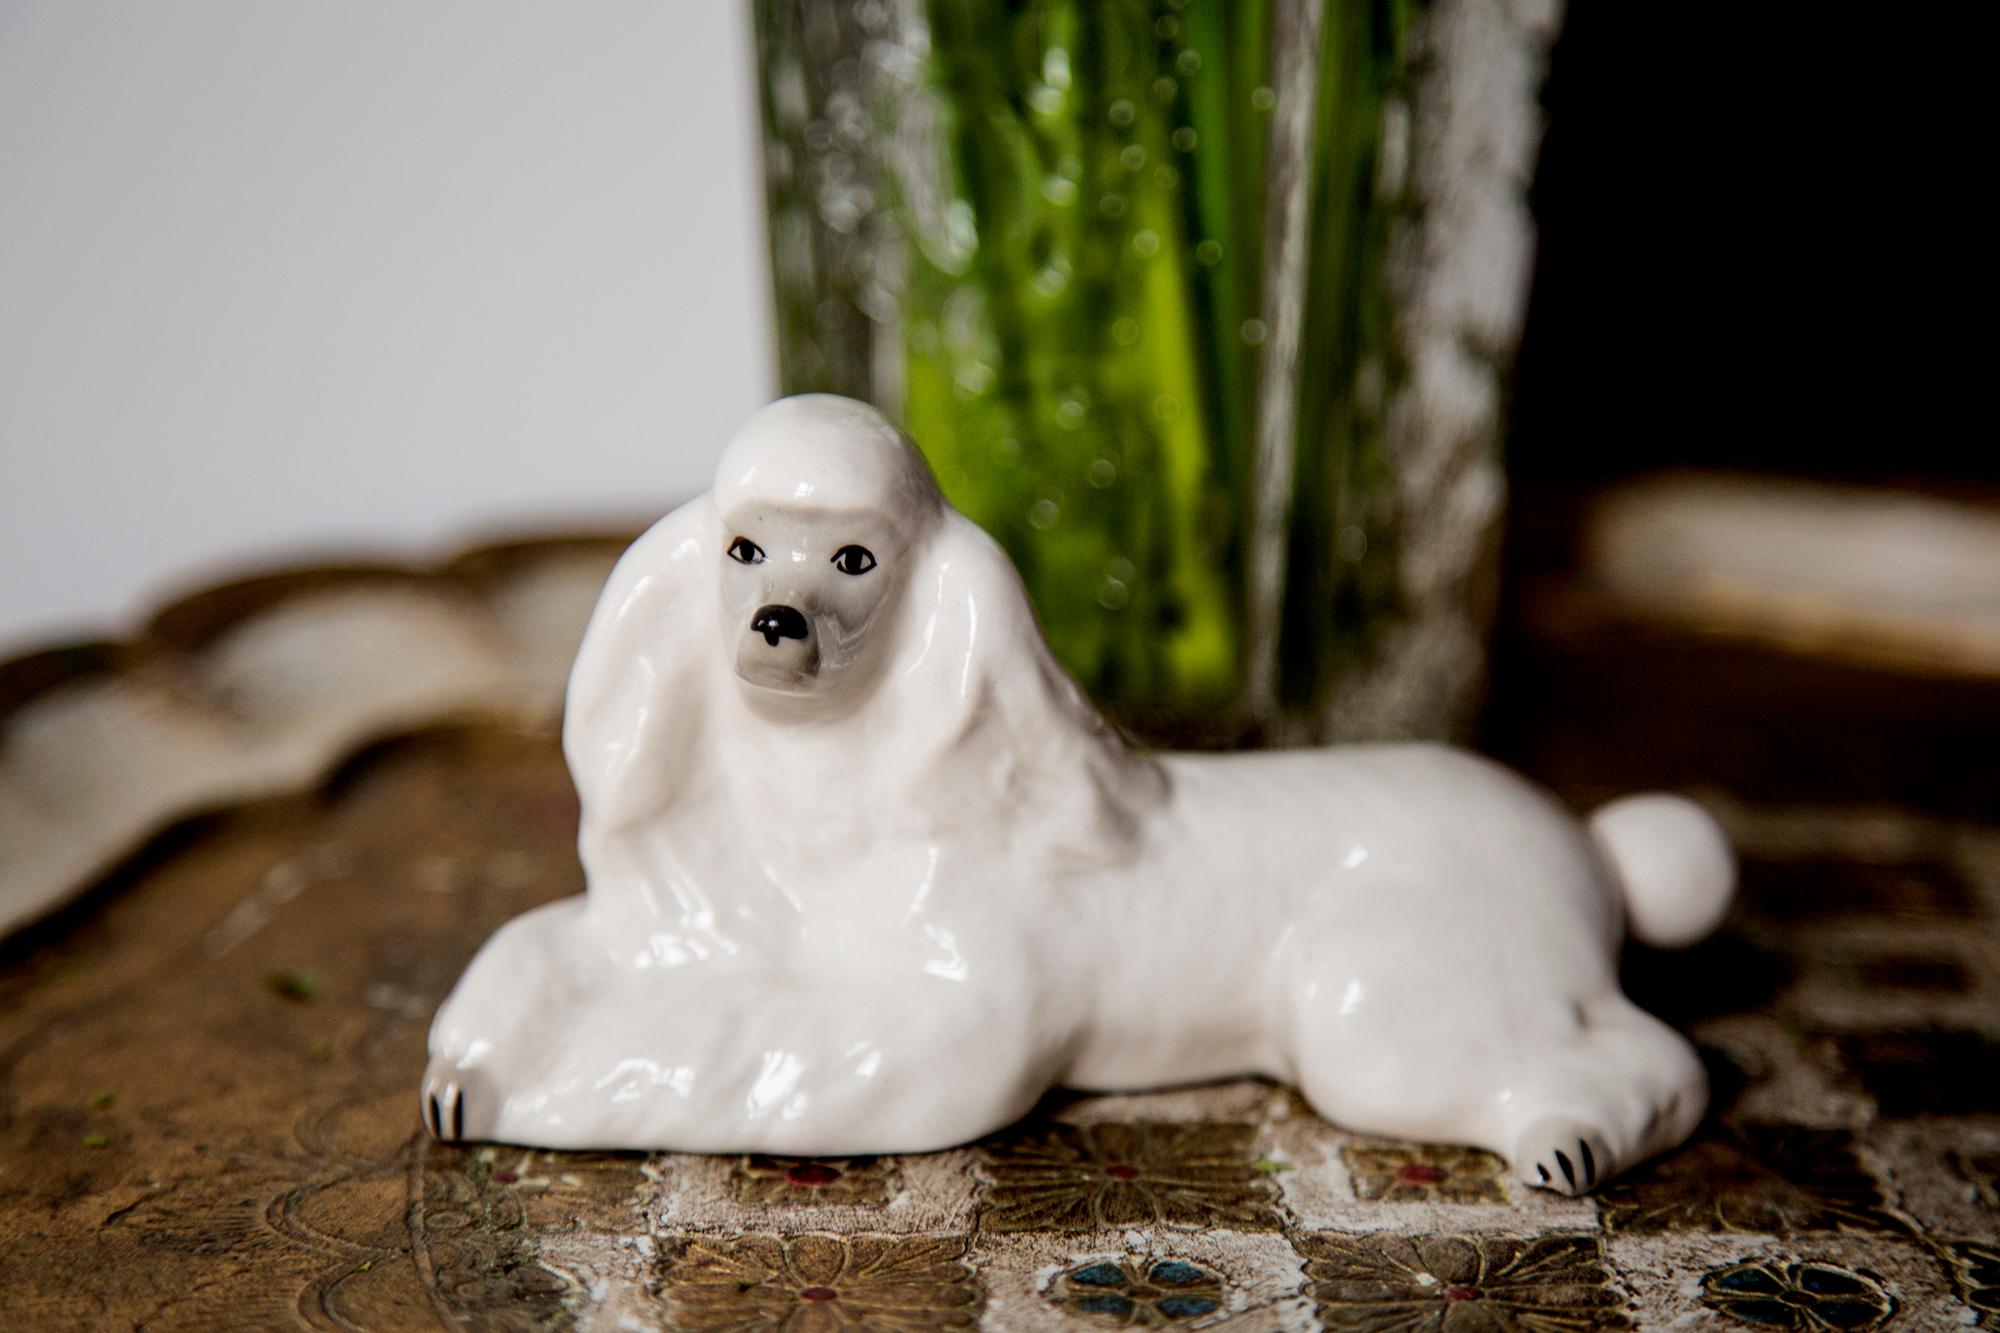 Painted ceramic, very good original vintage condition. No damages or cracks. Beautiful and unique decorative sculpture. White Poodle Dog Sculpture was produced in England. Only one dog available.